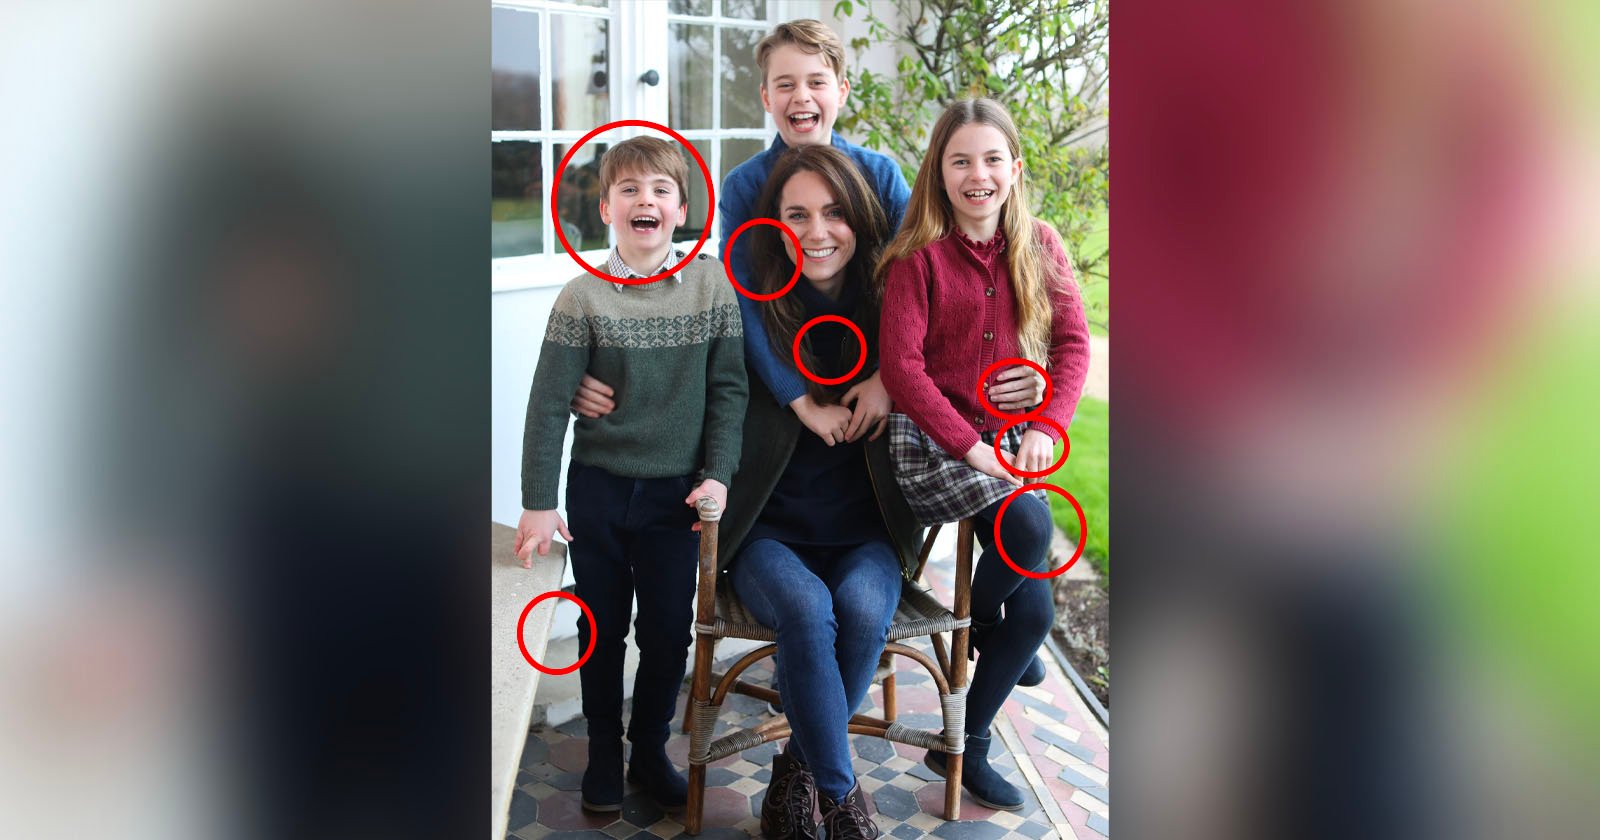 All The Inconsistencies and Editing Mistakes in Kate Middletons Photo